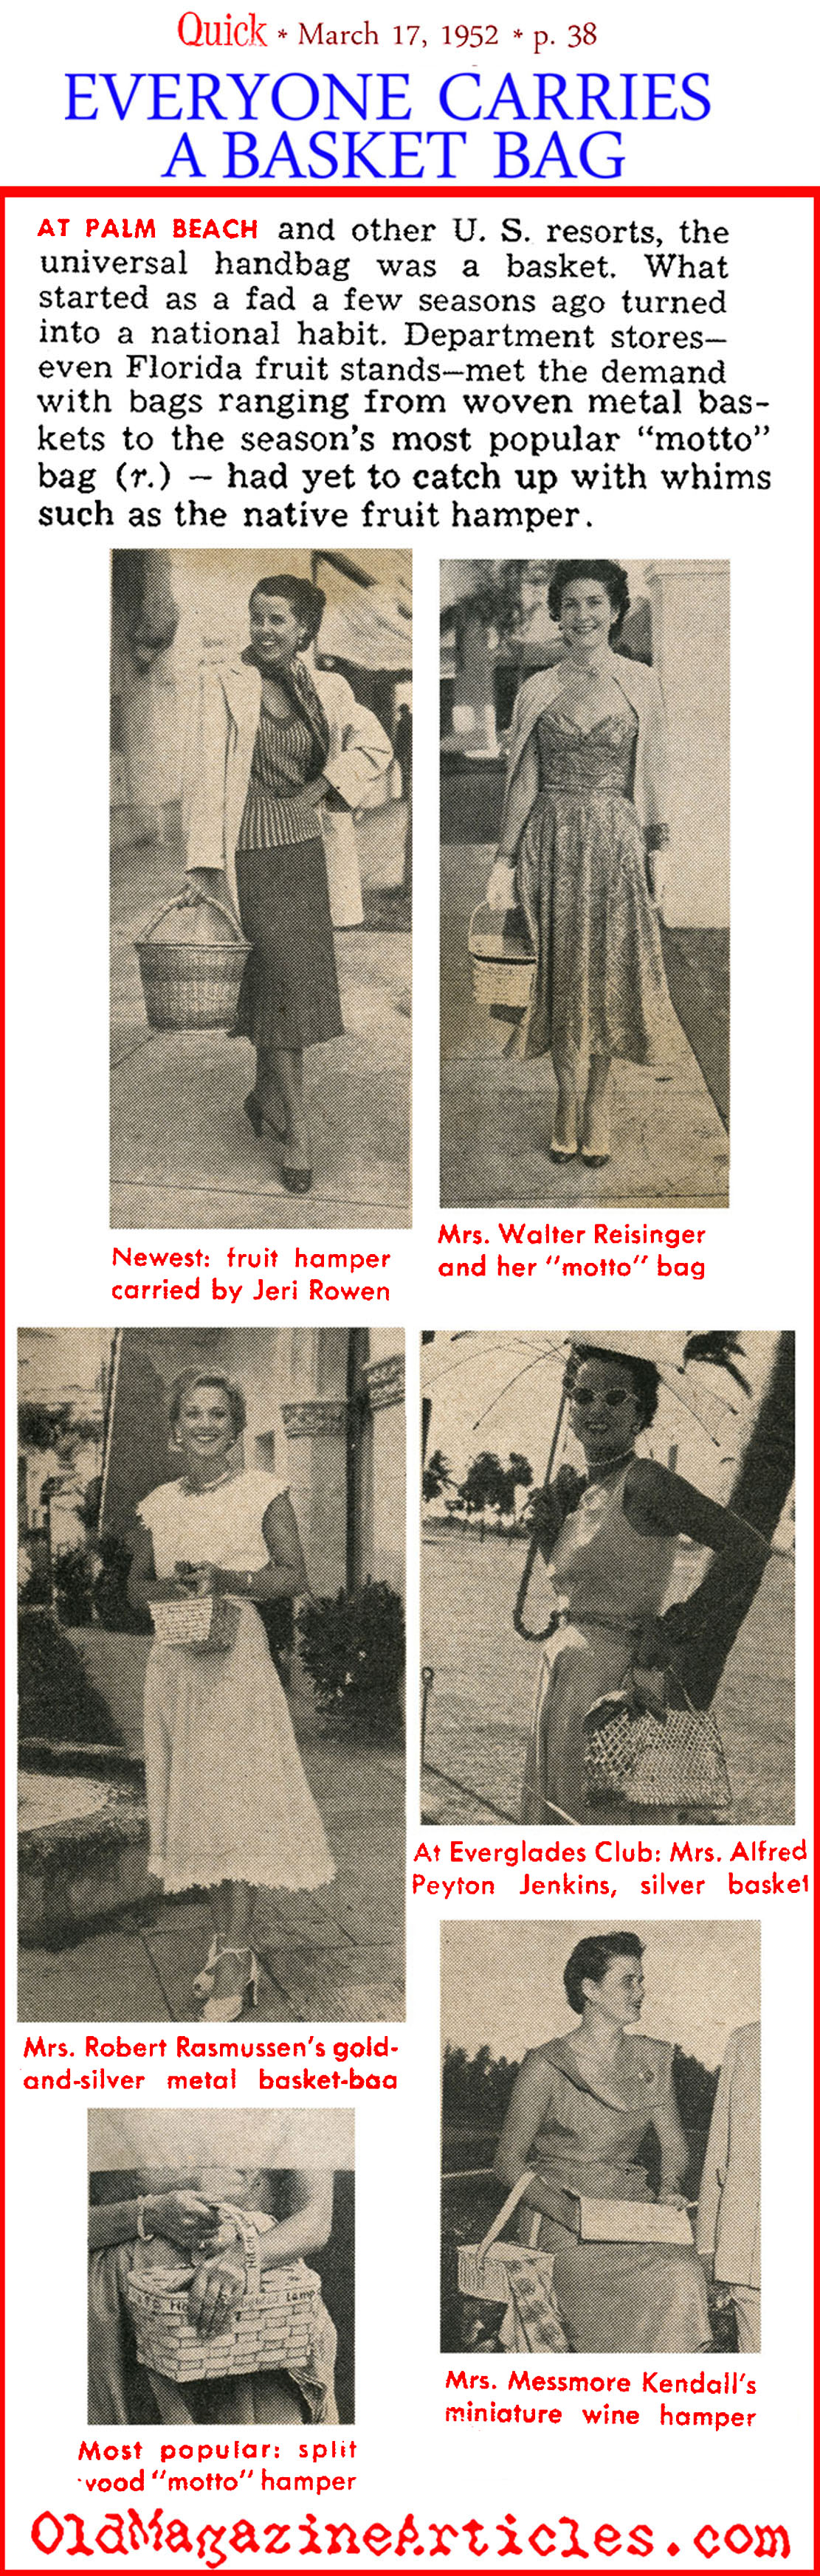 The Basket Bags (Quick Magazines, 1952)